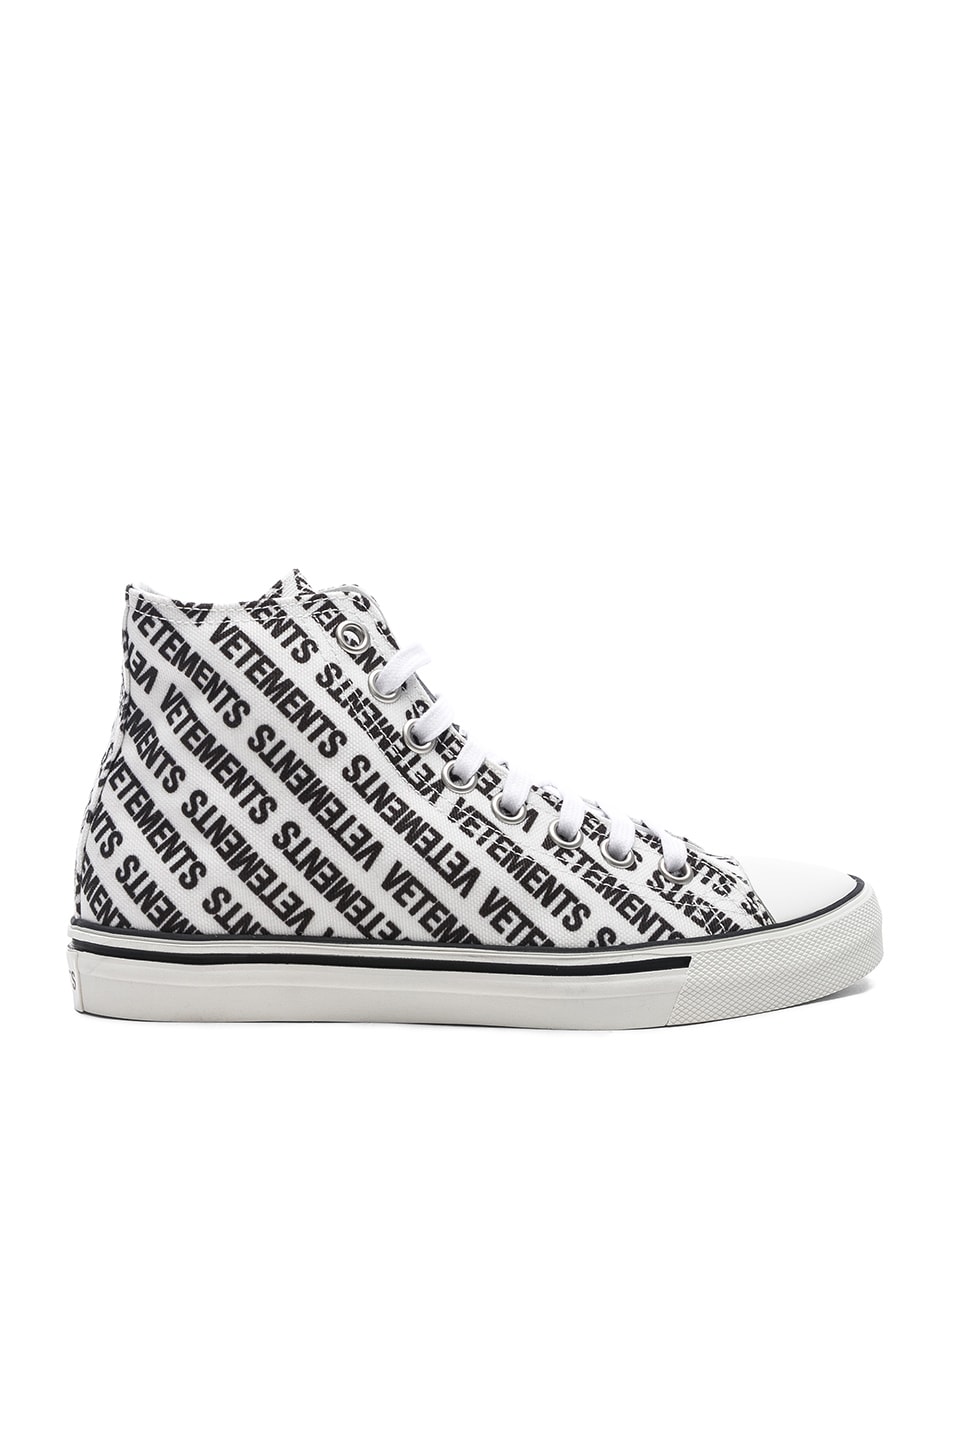 Image 1 of VETEMENTS Printed Canvas High Top Sneakers in White & Black